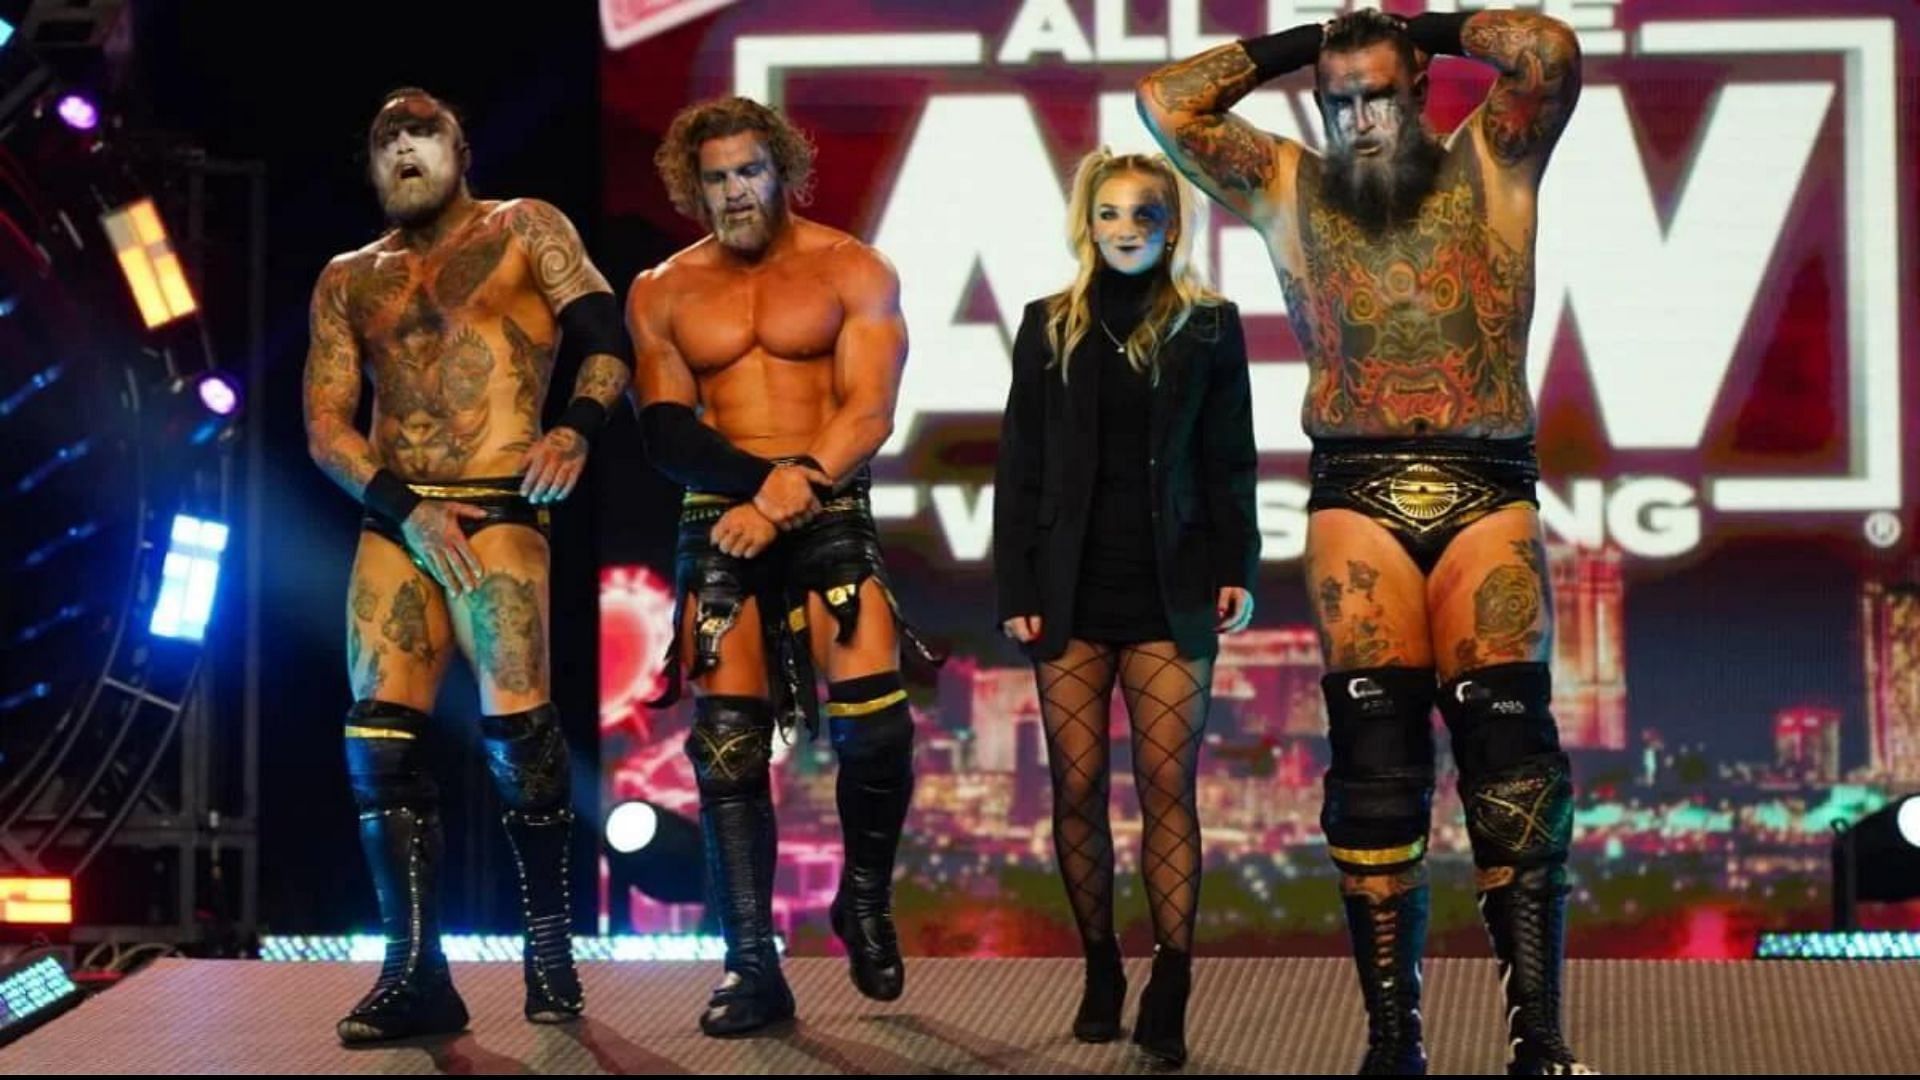 The House of Black are one of the dominant factions of AEW